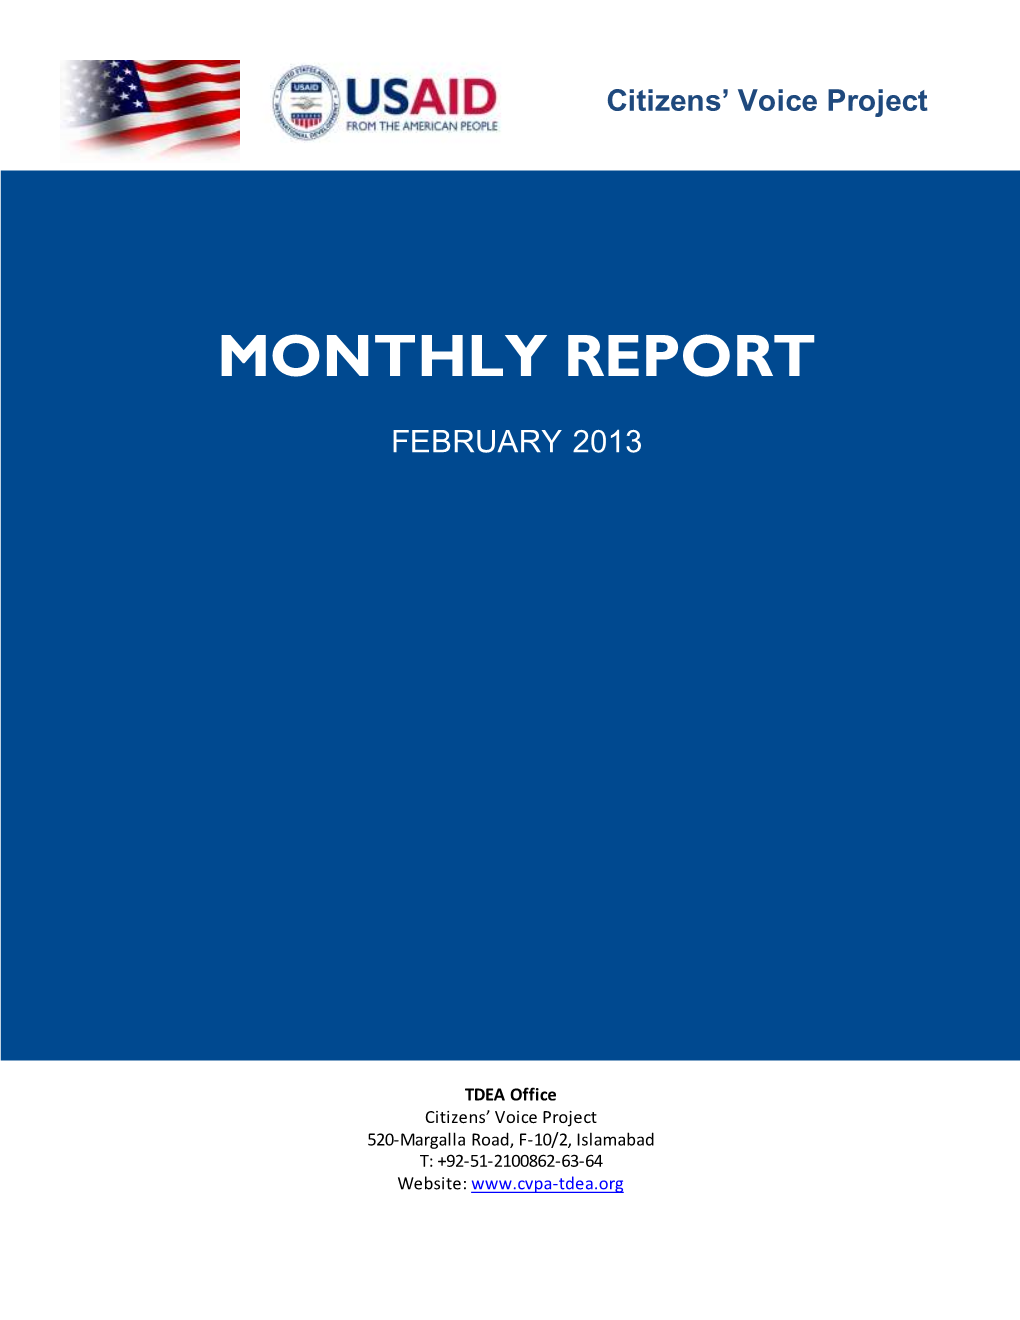 Quarterly Reporting Formats with 1 Grantee and Reviewed 13 Monthly/Quarterly Reports Received from the Grantees